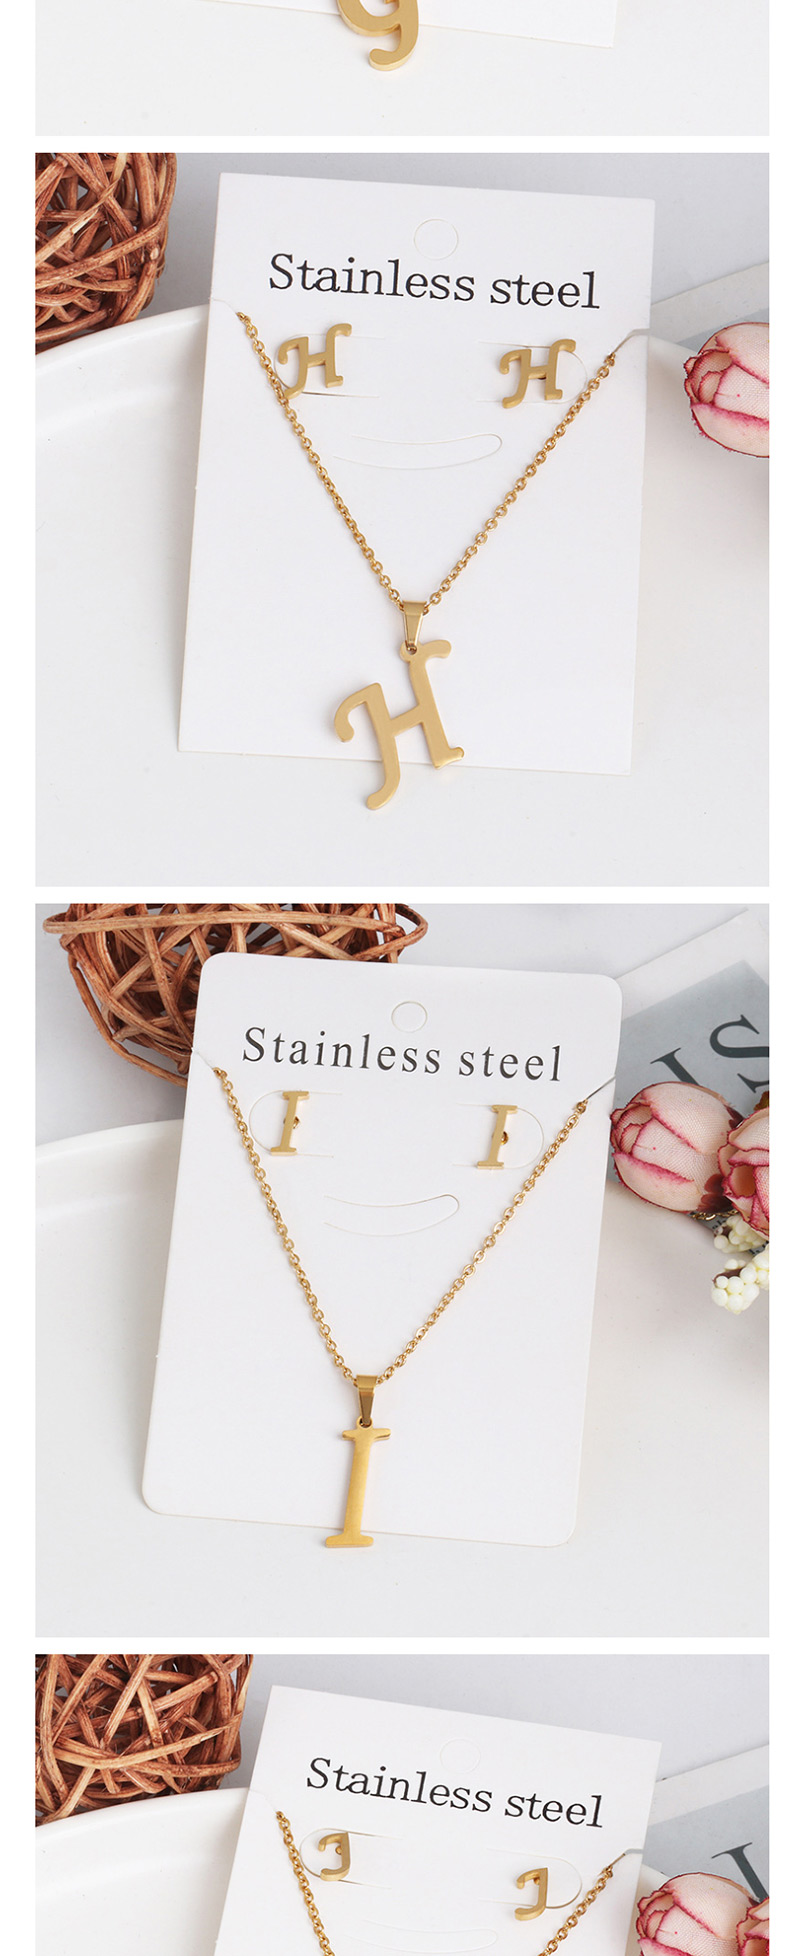 Fashion I Gold Stainless Steel Letter Necklace Earrings Two-piece,Jewelry Sets